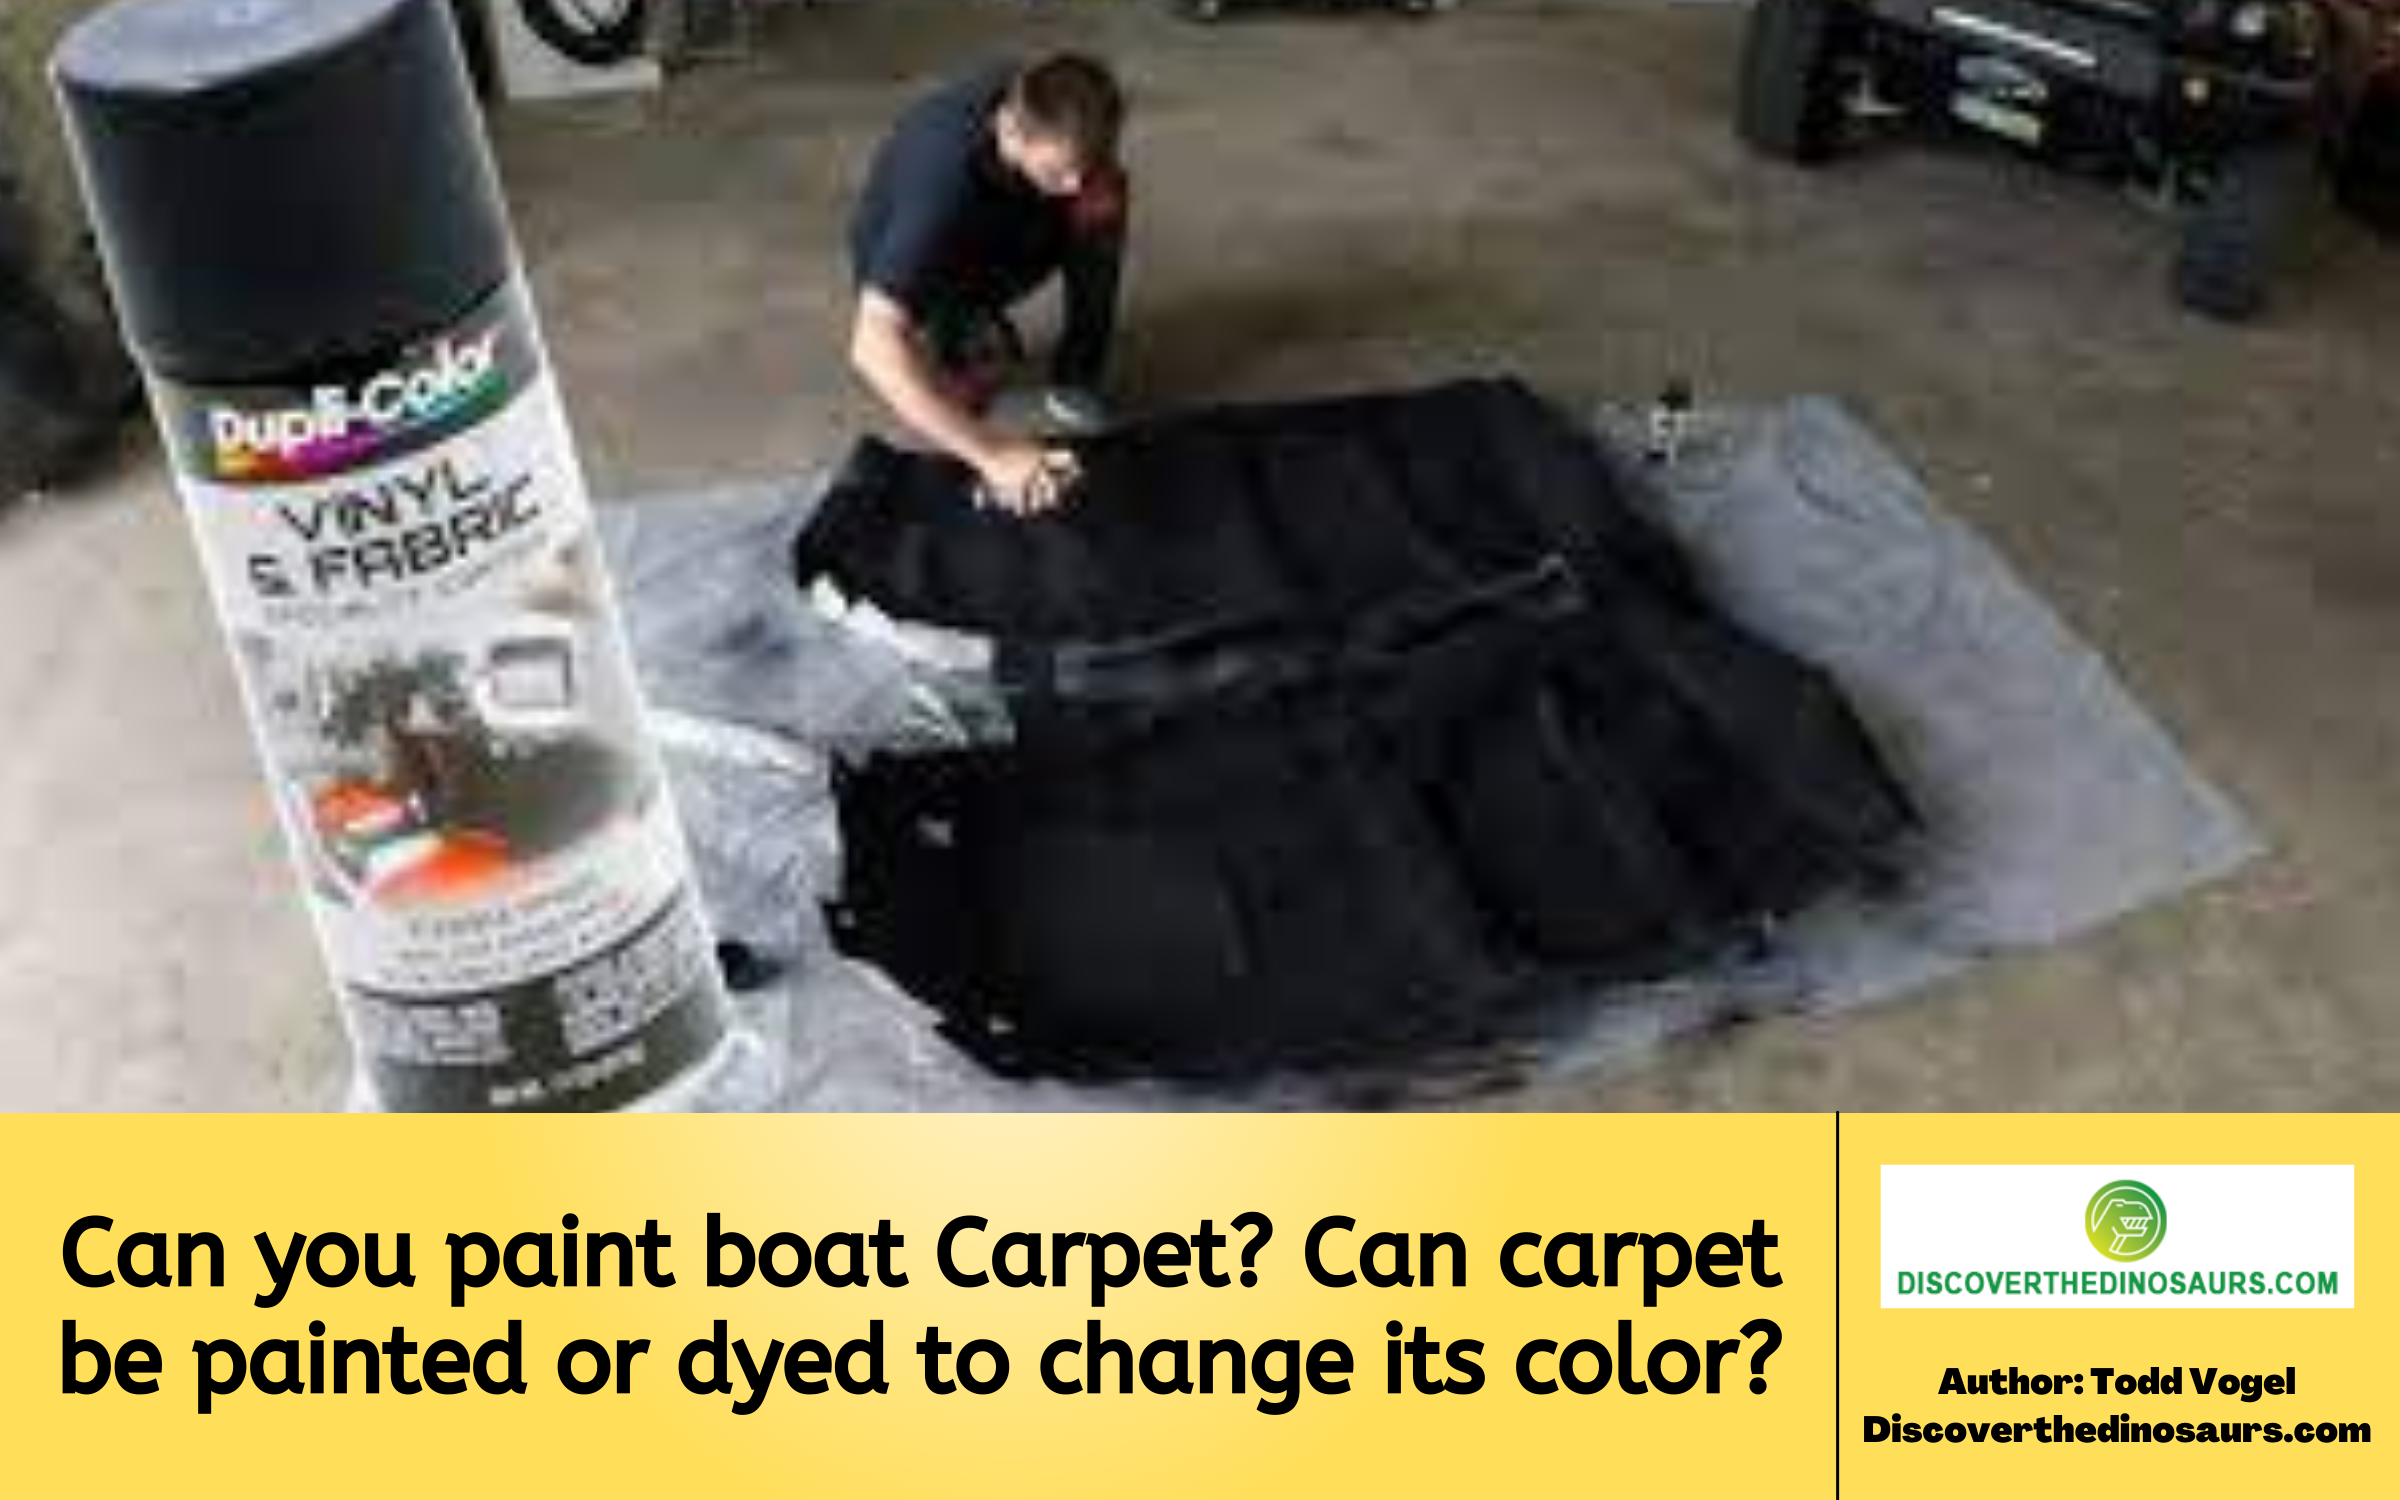 Can you paint boat Carpet? 